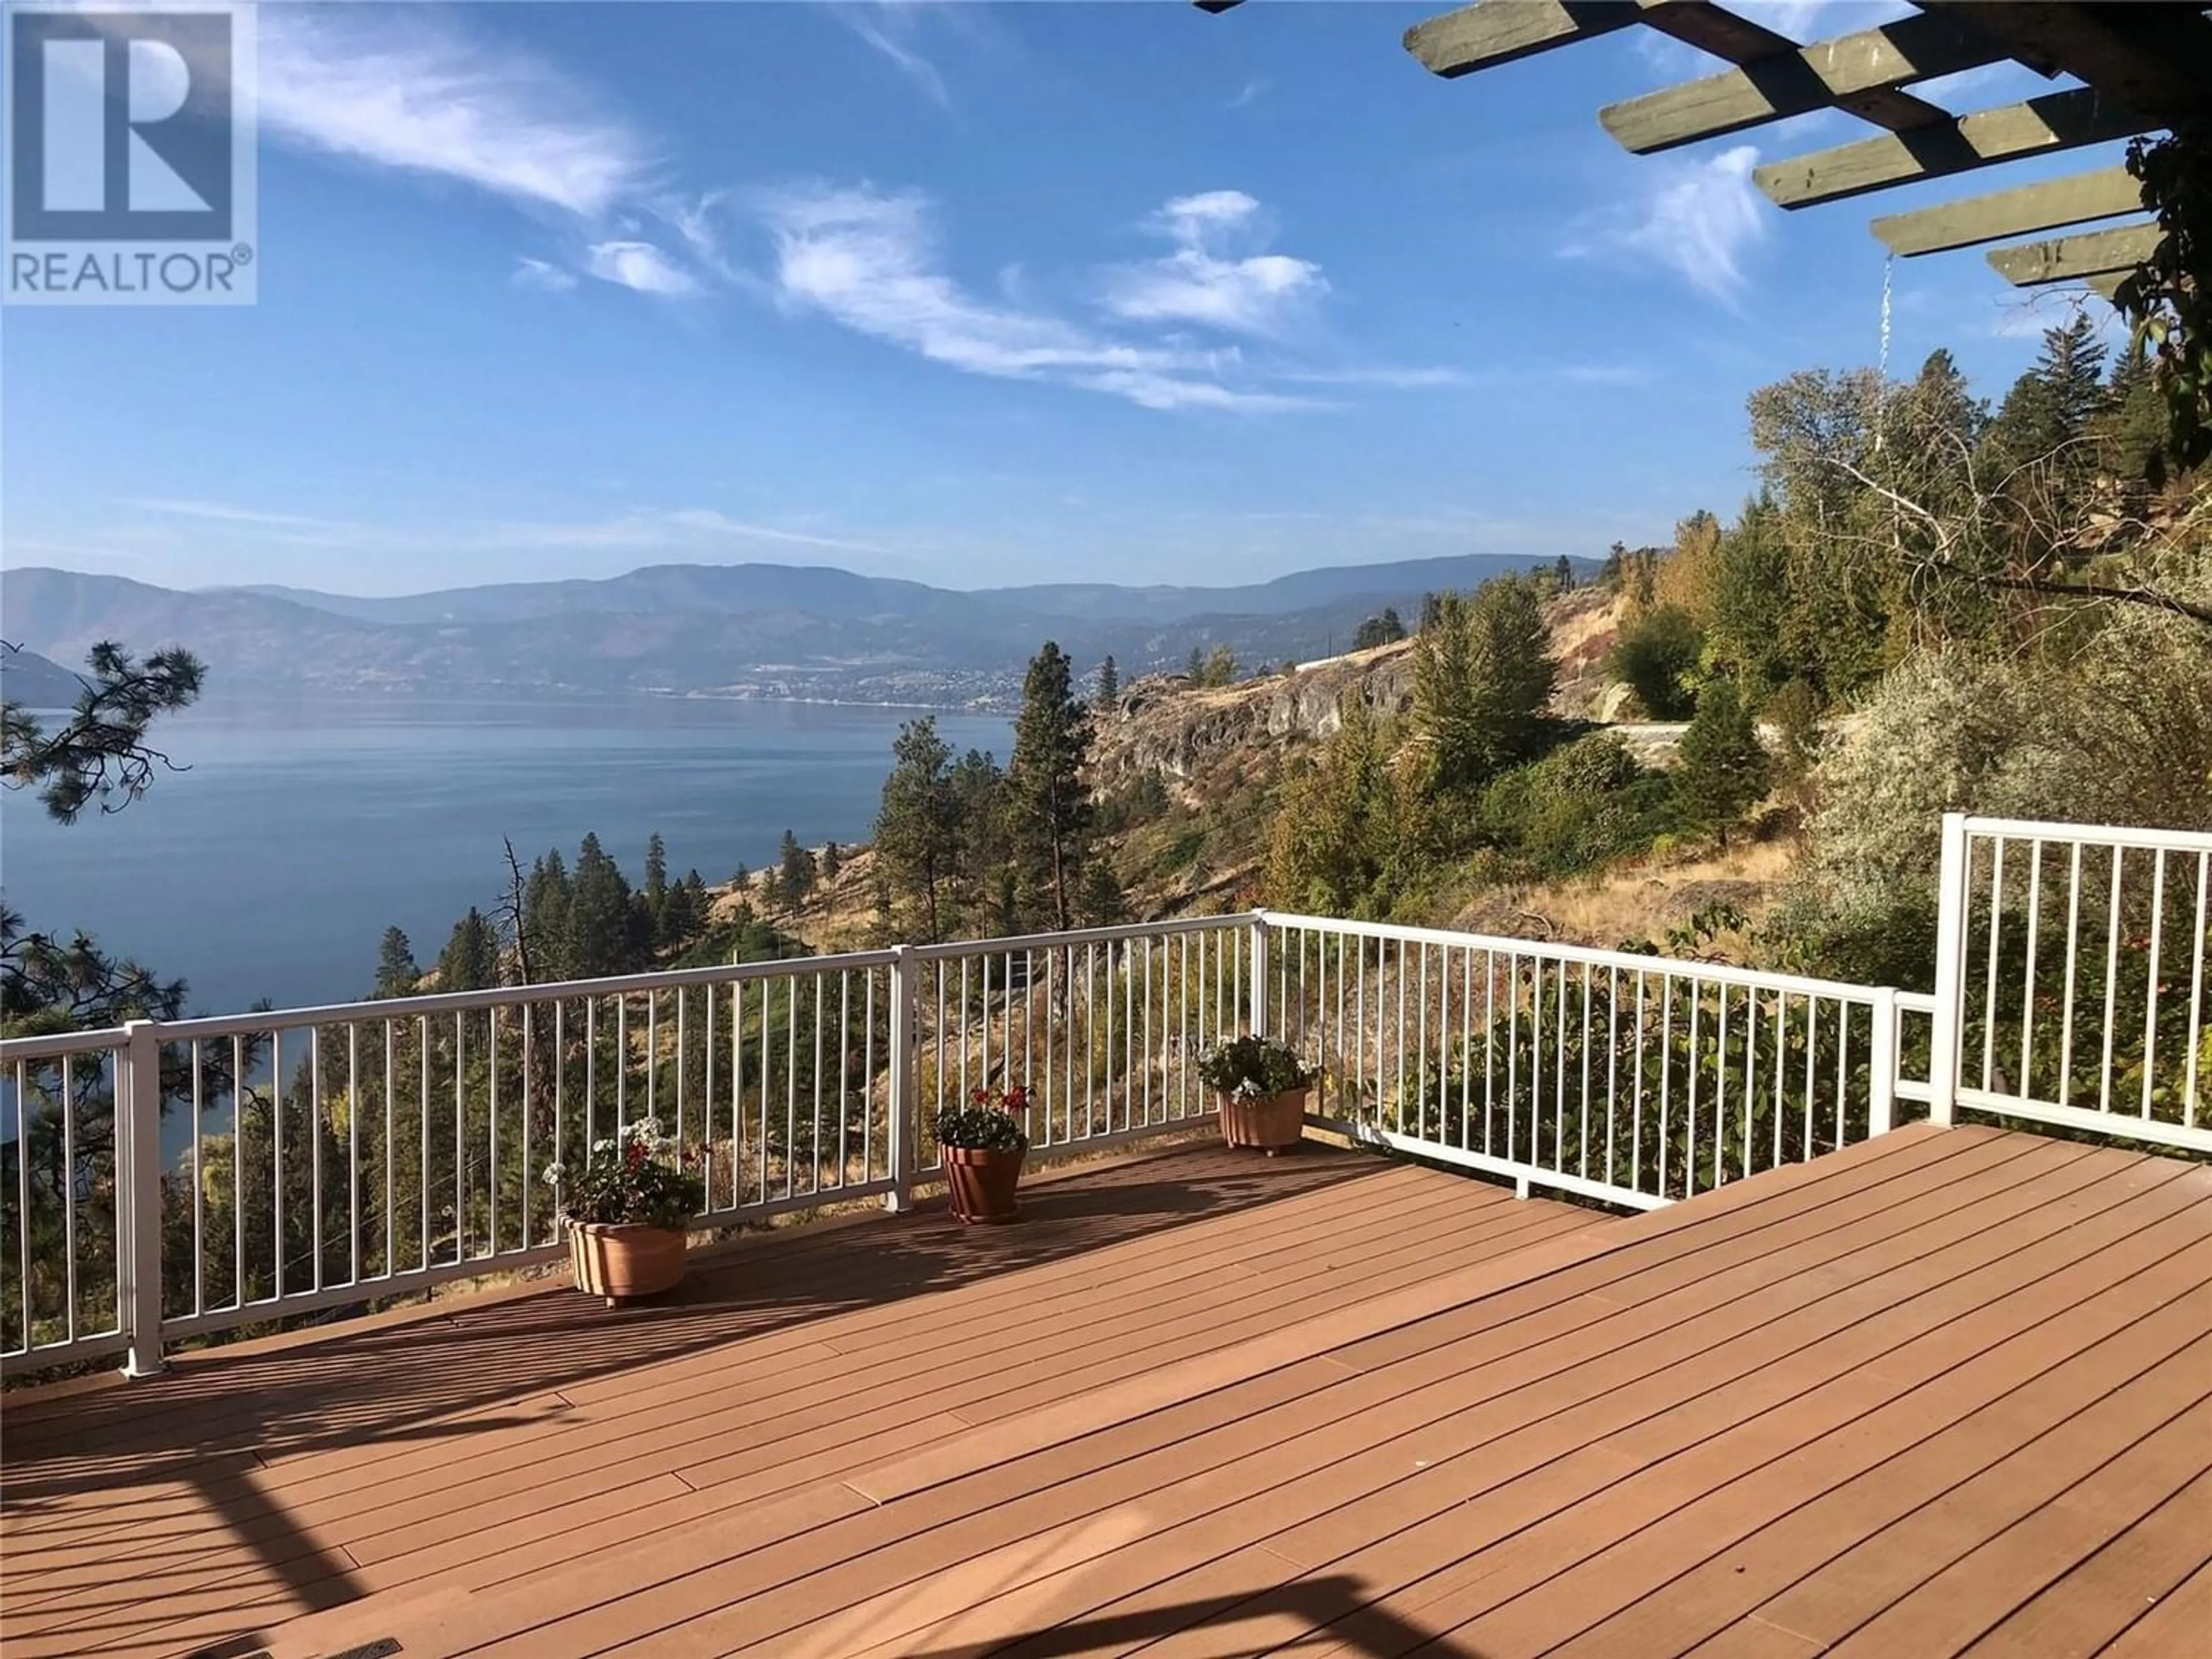 Lakeview for 3040 Seclusion Bay Road, West Kelowna British Columbia V4T1W5